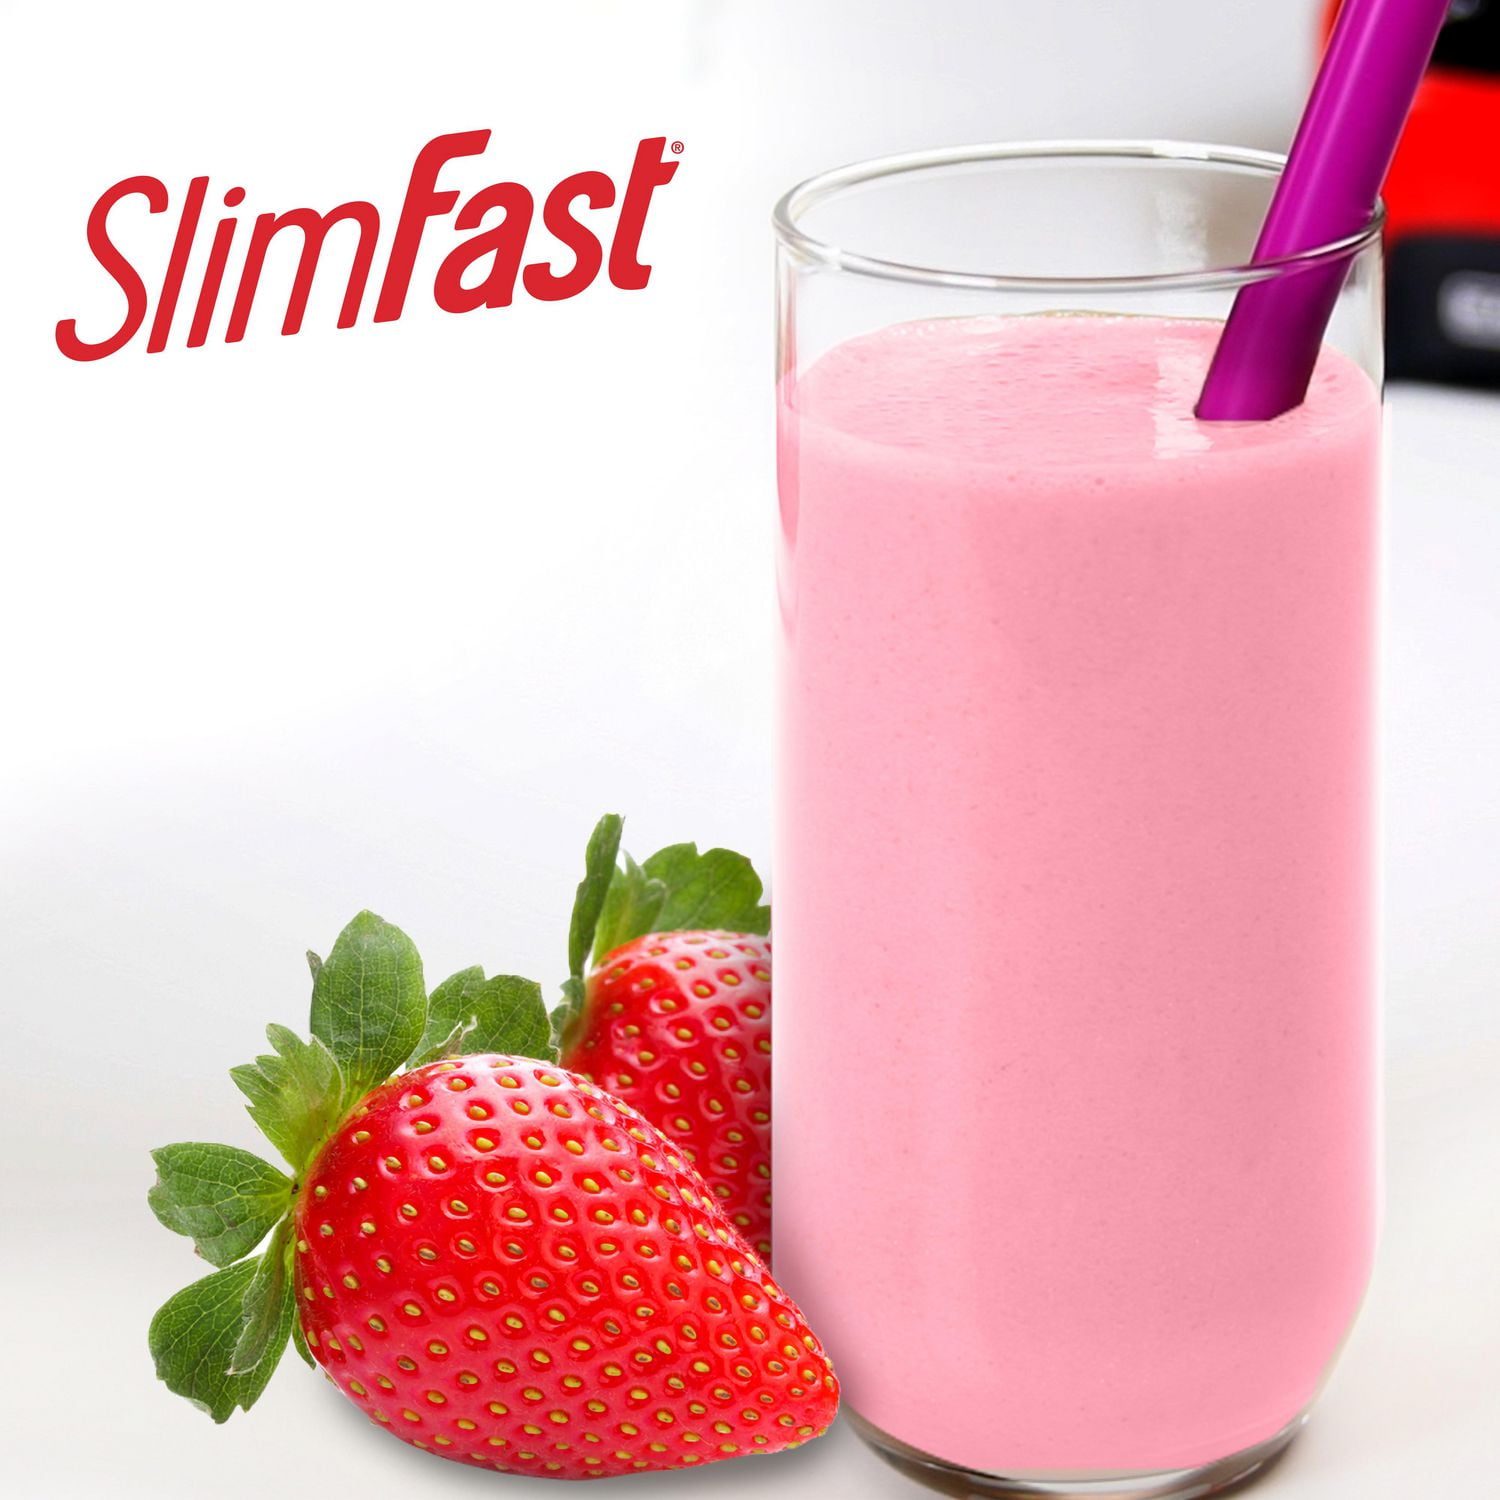  Quick Slim Meal Replacement Shake for Weight Loss, 30 Servings,  20g Protein, 27 Vitamins & Minerals, Dietary Fiber, Low Carb, Gluten Free  (Strawberry Cream, 30 Sachets) : Health & Household